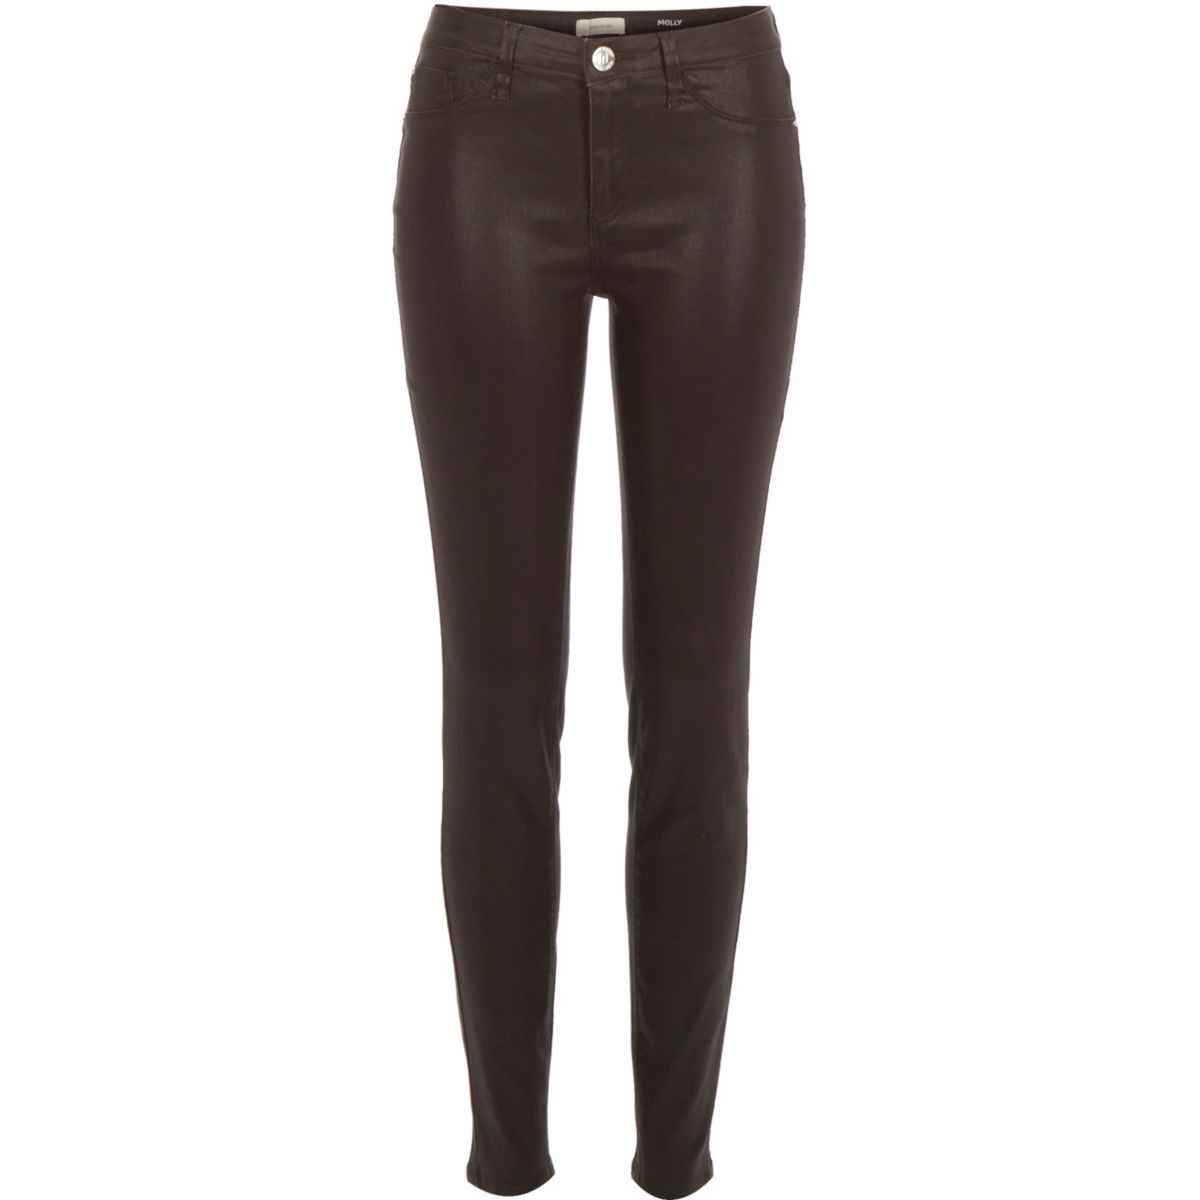 Brown coated Molly jeggings - Jeans - Sale - women